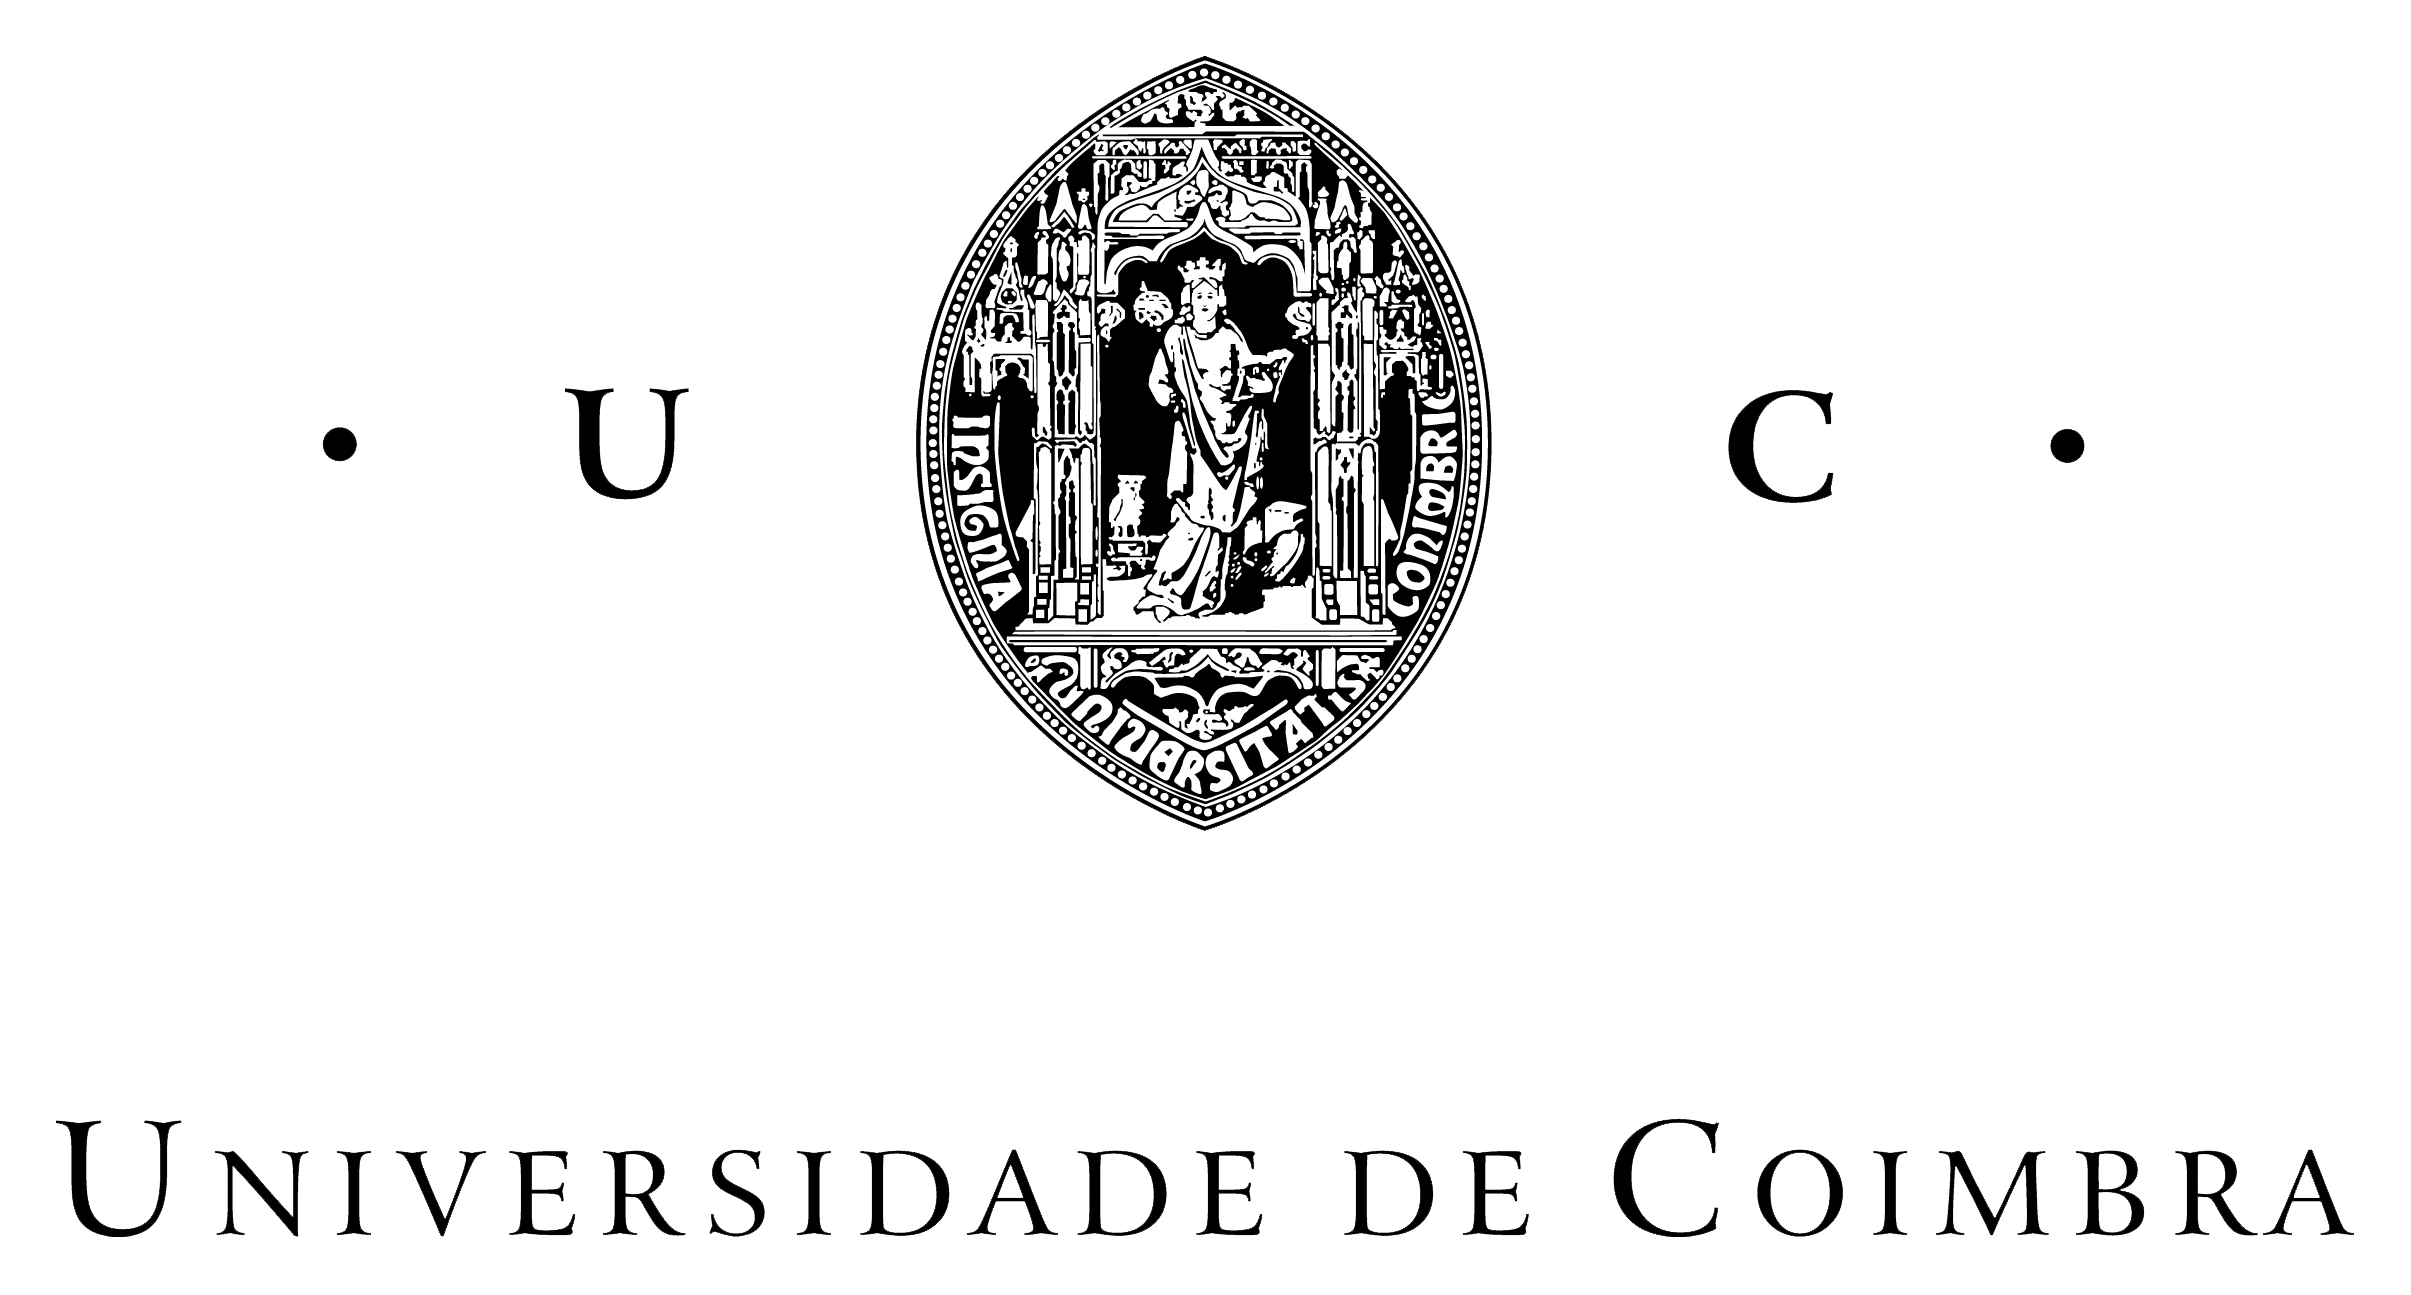 kisspng-university-of-coimbra-utrecht-university-higher-ed-go-to-image-page-5b72ee55b2a286.3478298415342587737317